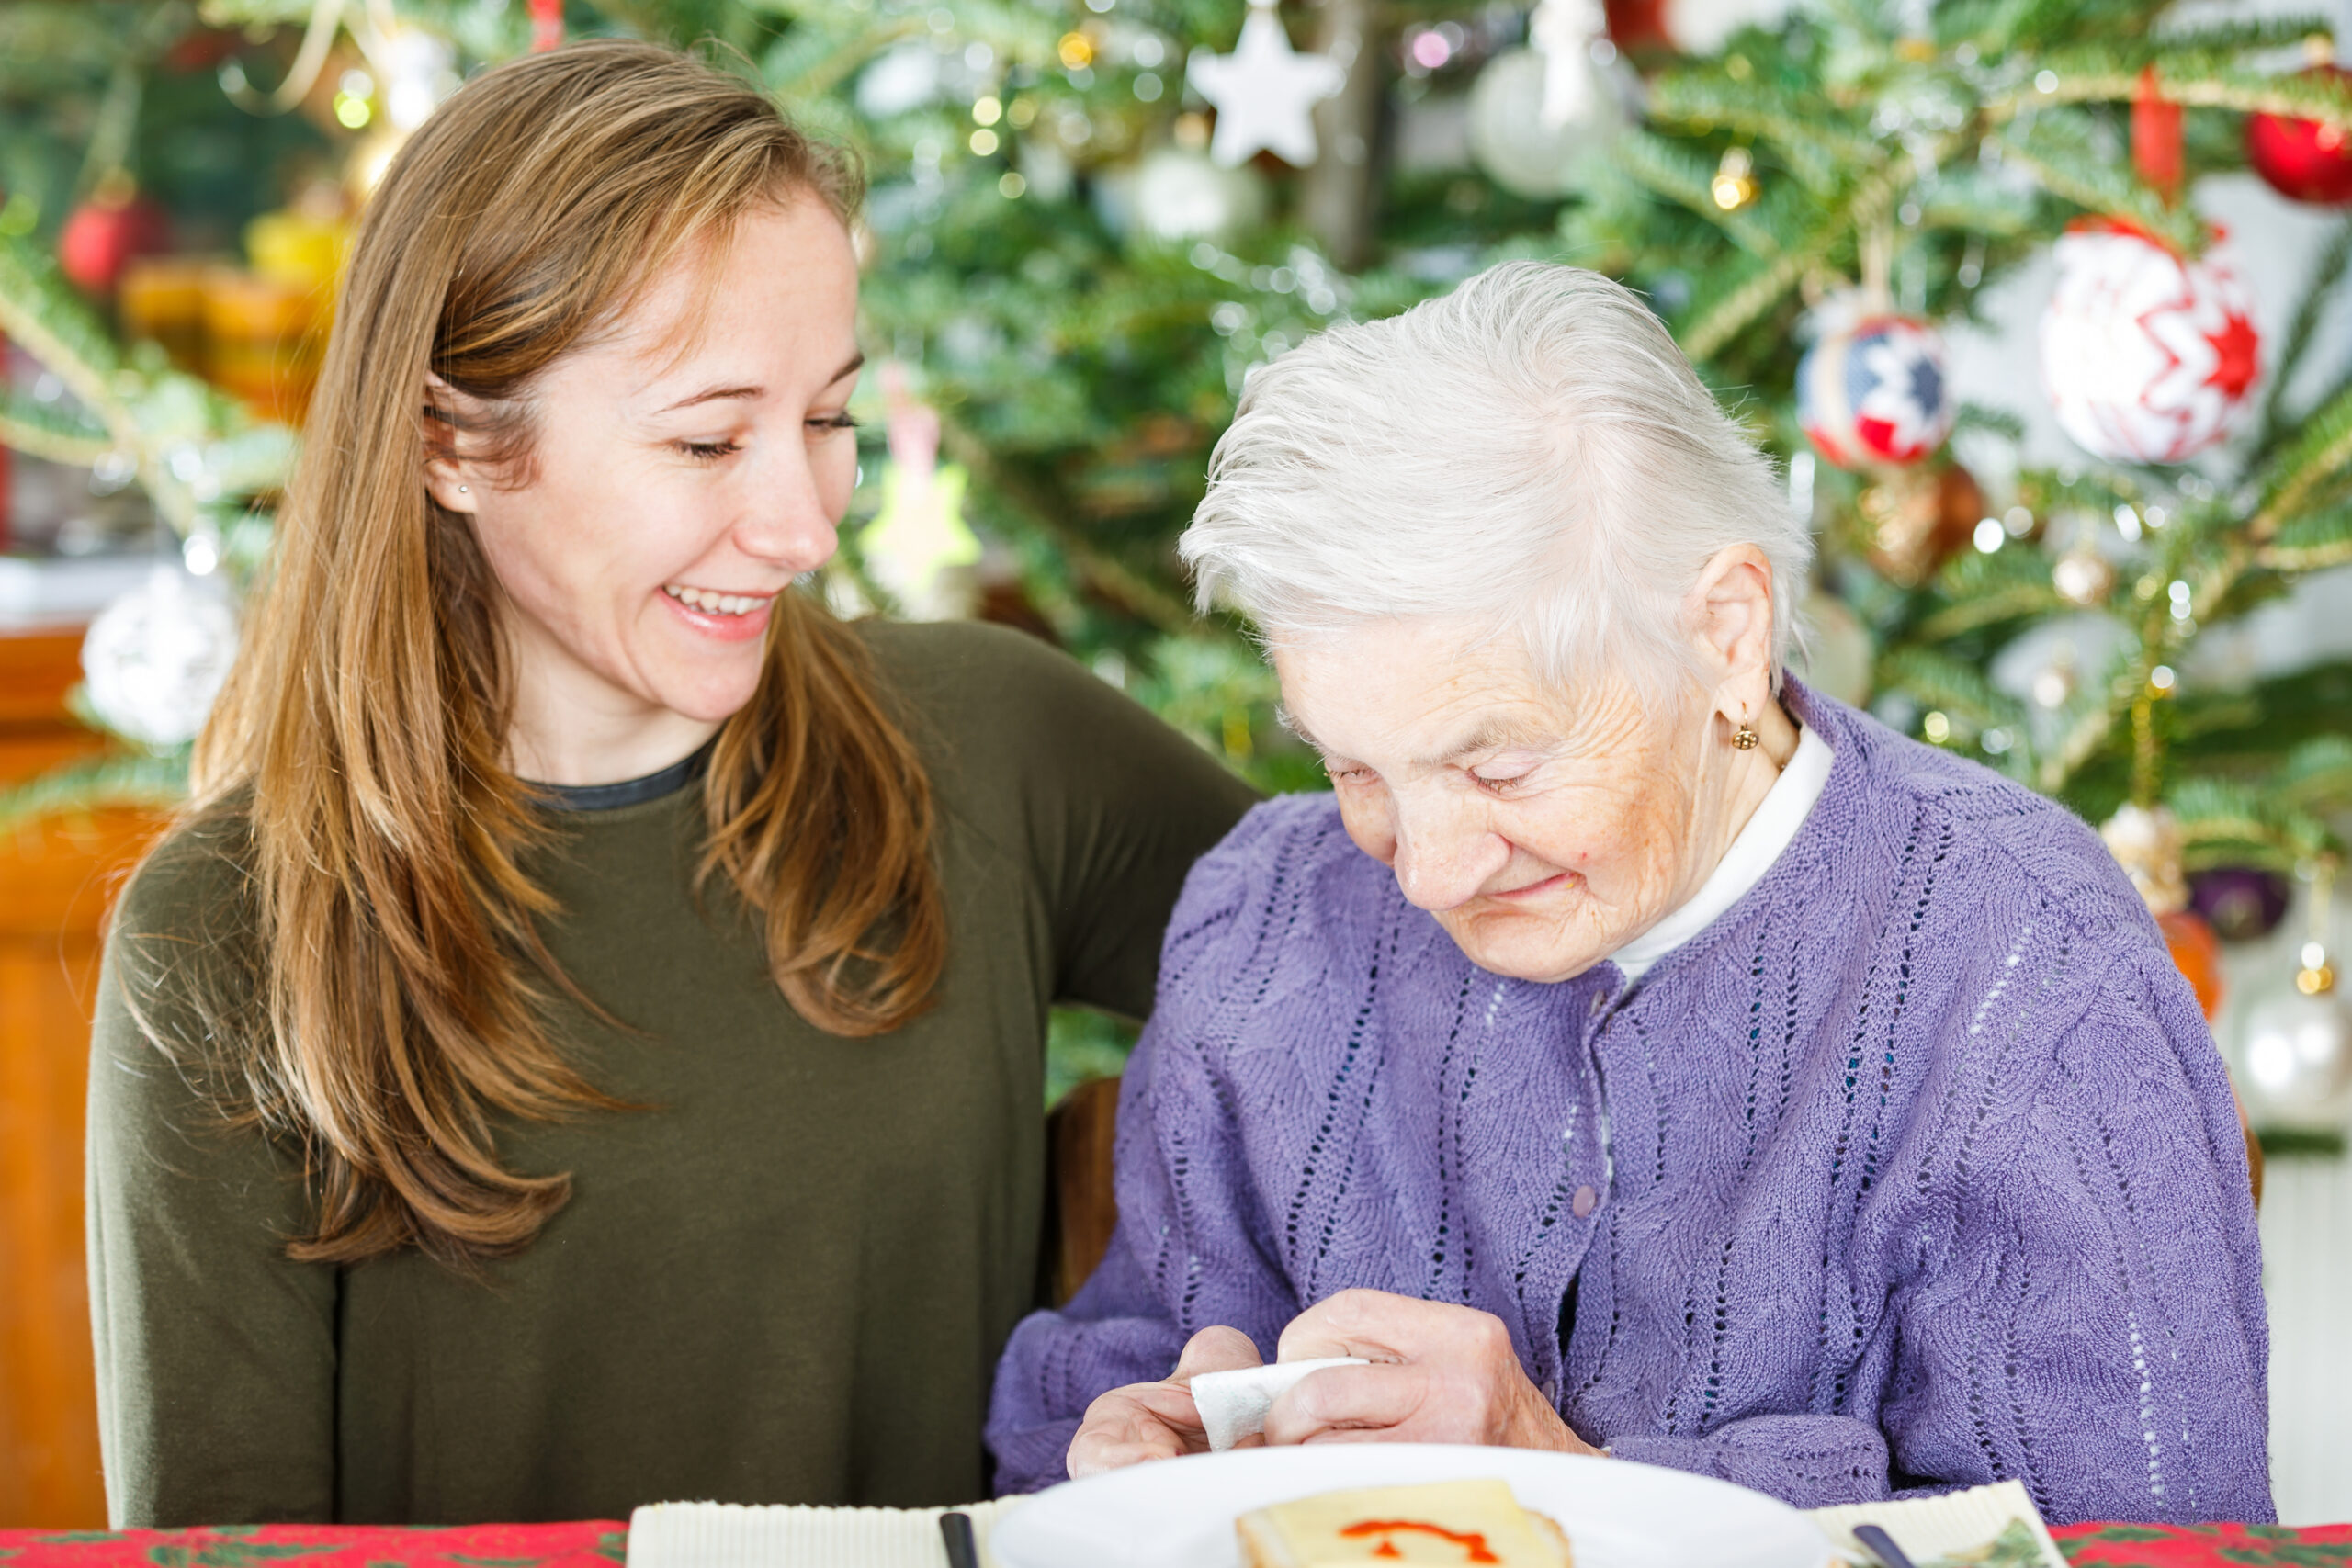 Volunteer with nursing home resident during the Christmas holiday season.